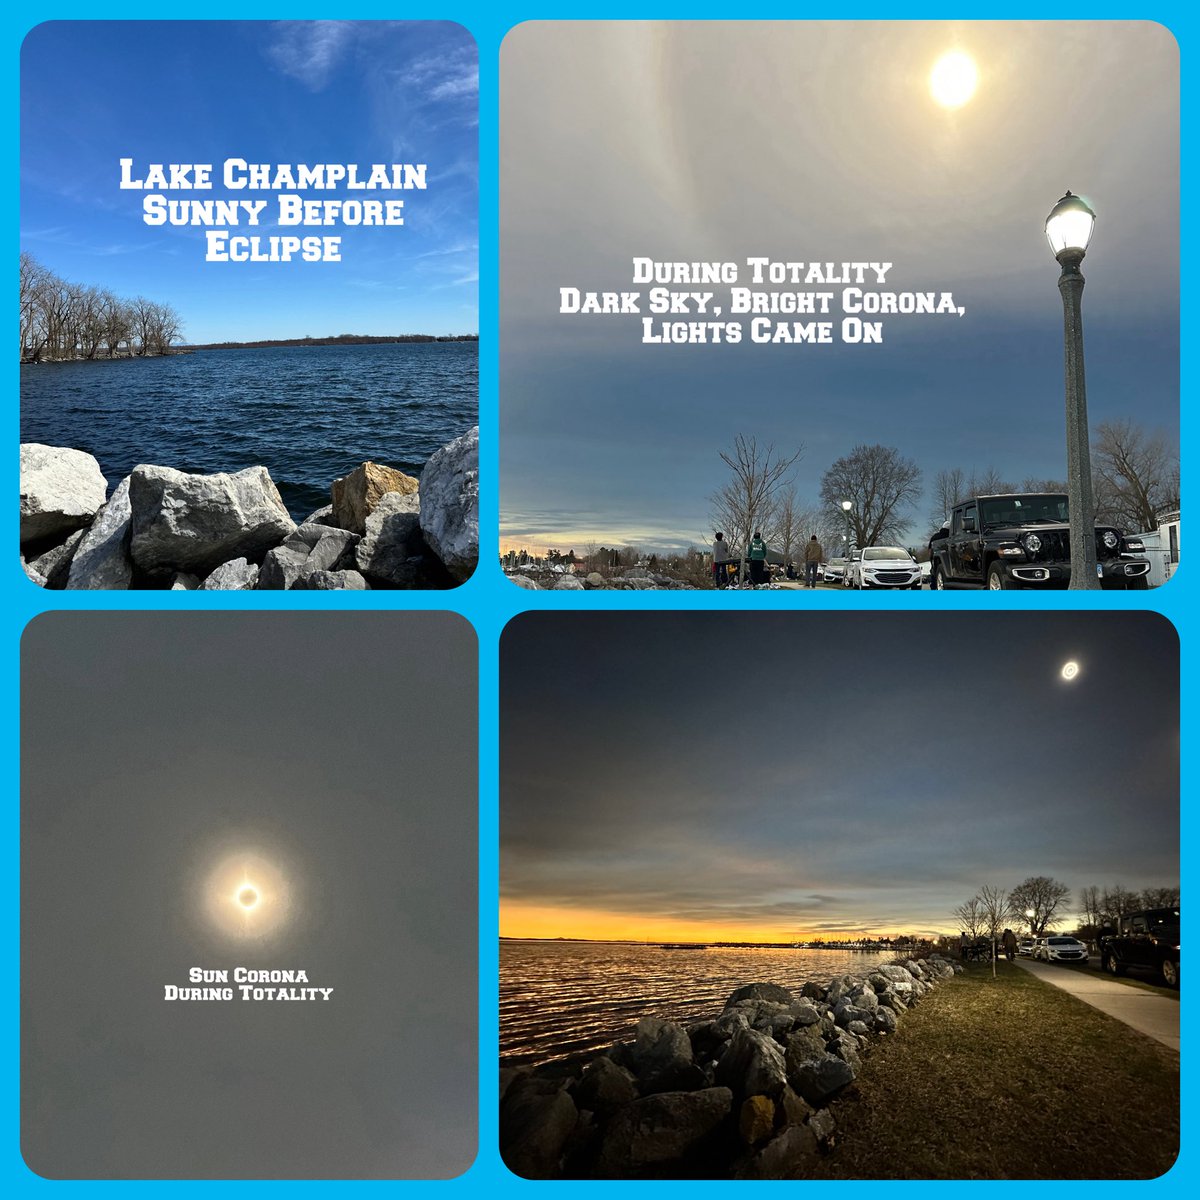 The moment of #solareclipse 100% totality 🌑 sun to darkness, street lights came on, temperature dropped, corona was visible #LakeChamplain @CBSPhiladelphia